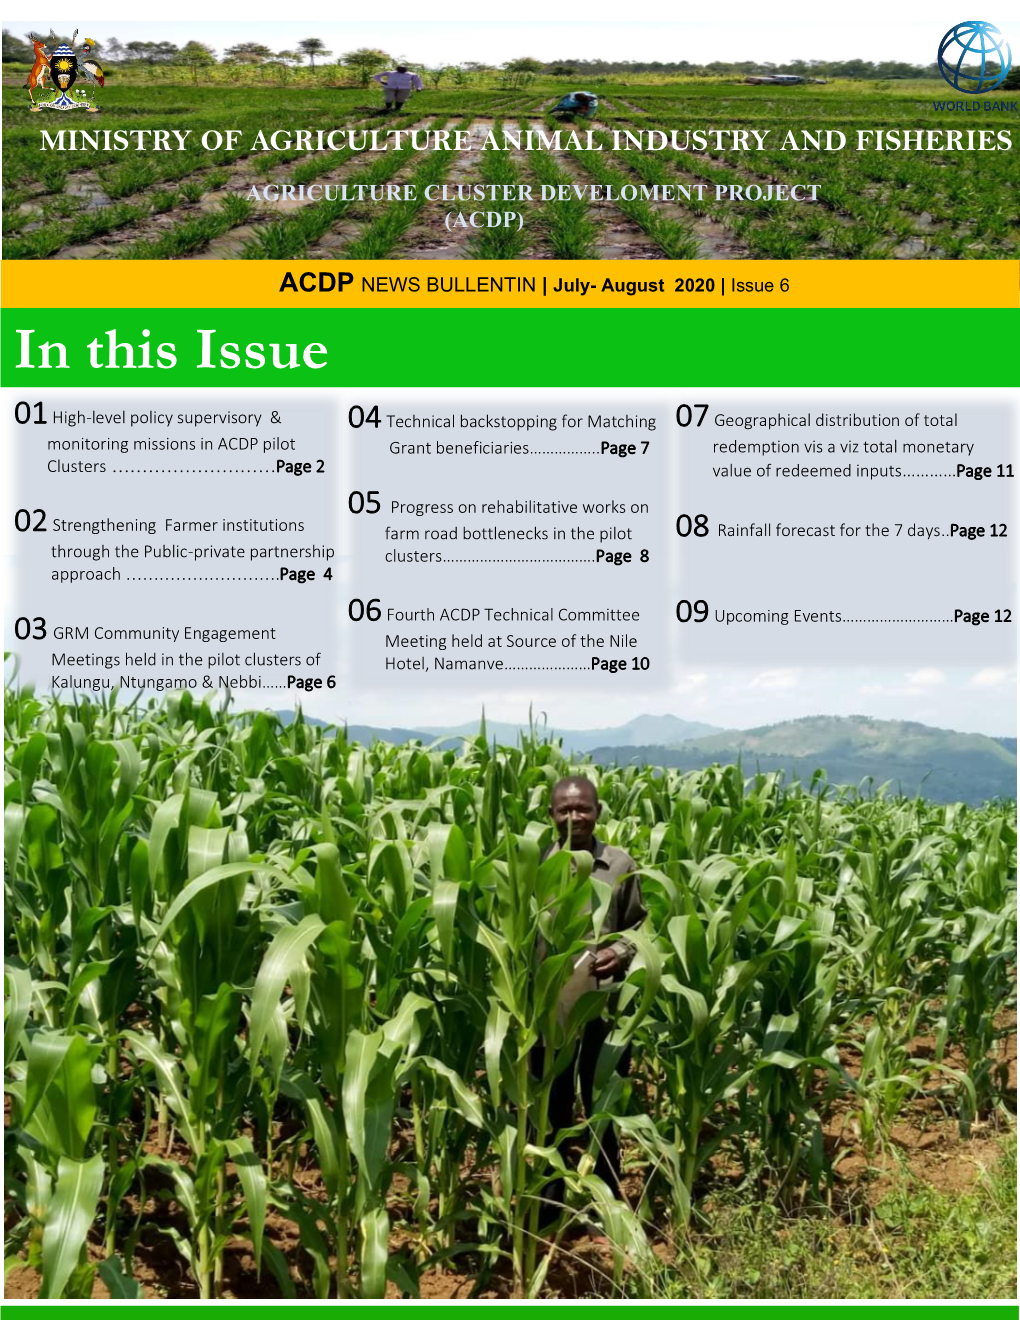 ACDP News Bullentin July- August 2020 Issue 6